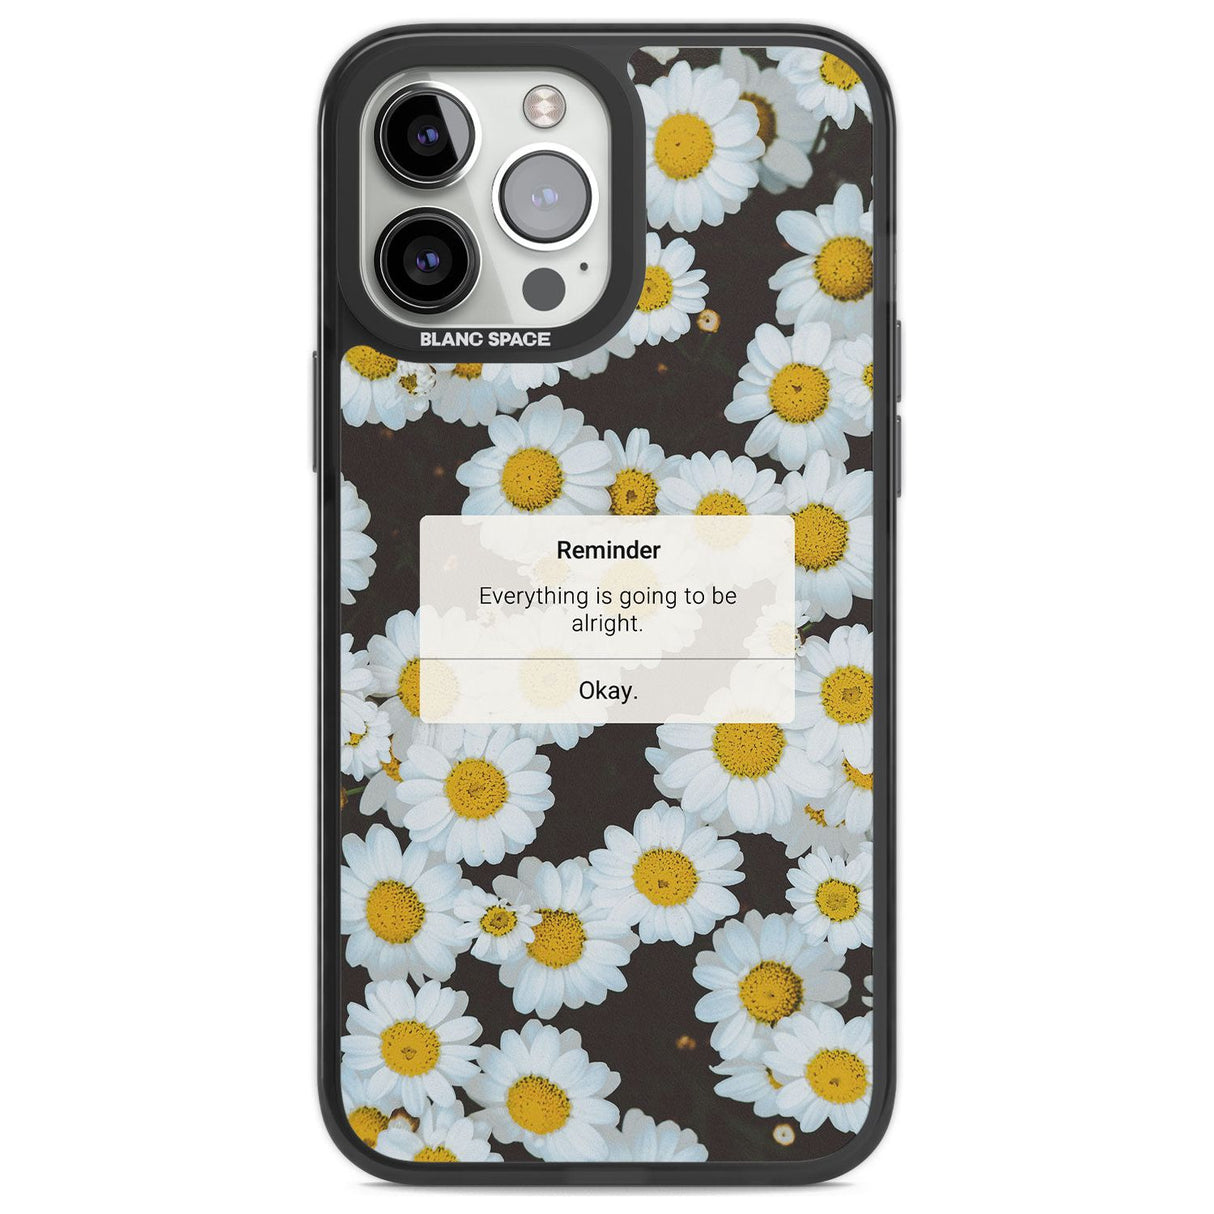 "Everything will be alright" iPhone Reminder Phone Case iPhone 13 Pro Max / Black Impact Case,iPhone 14 Pro Max / Black Impact Case Blanc Space